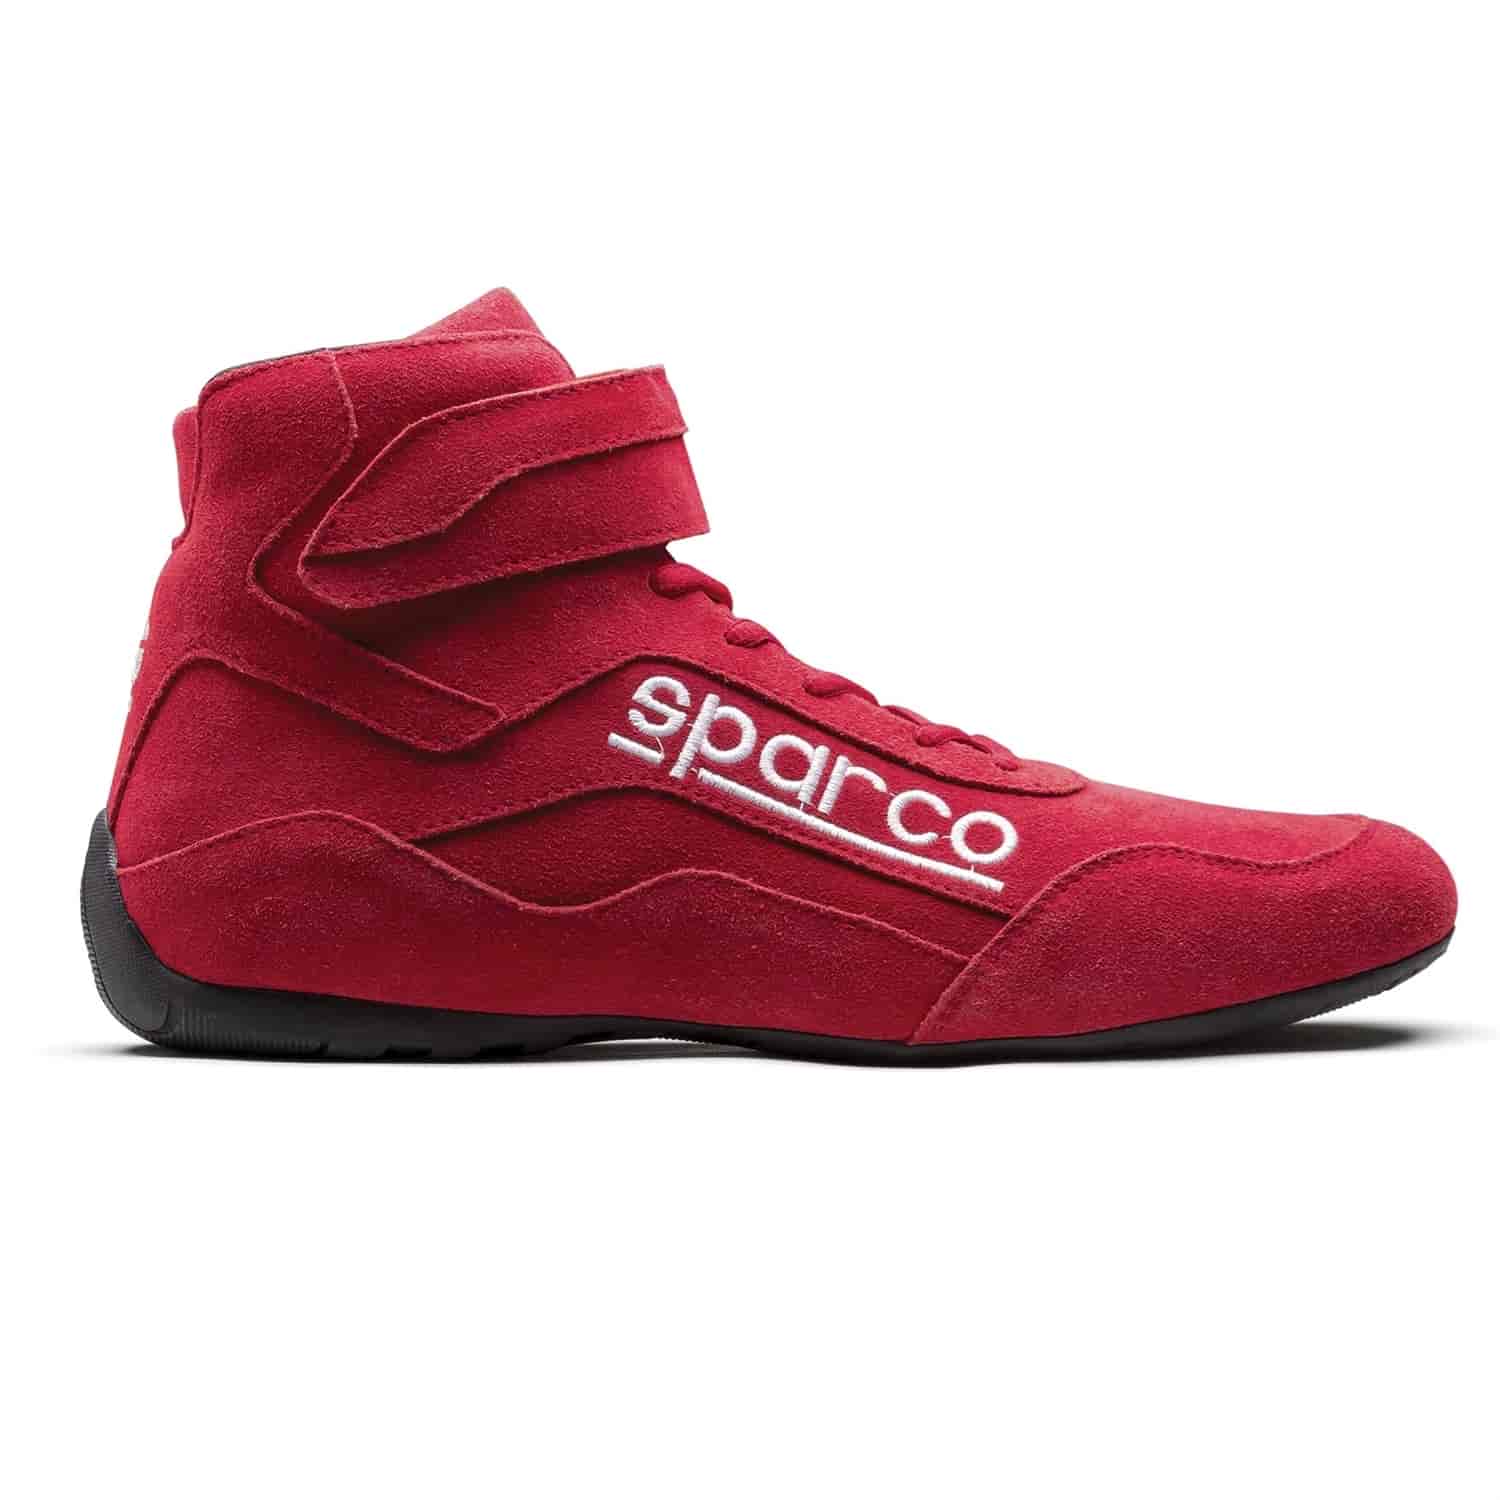 Race 2 Shoe Size 11.5 - Red